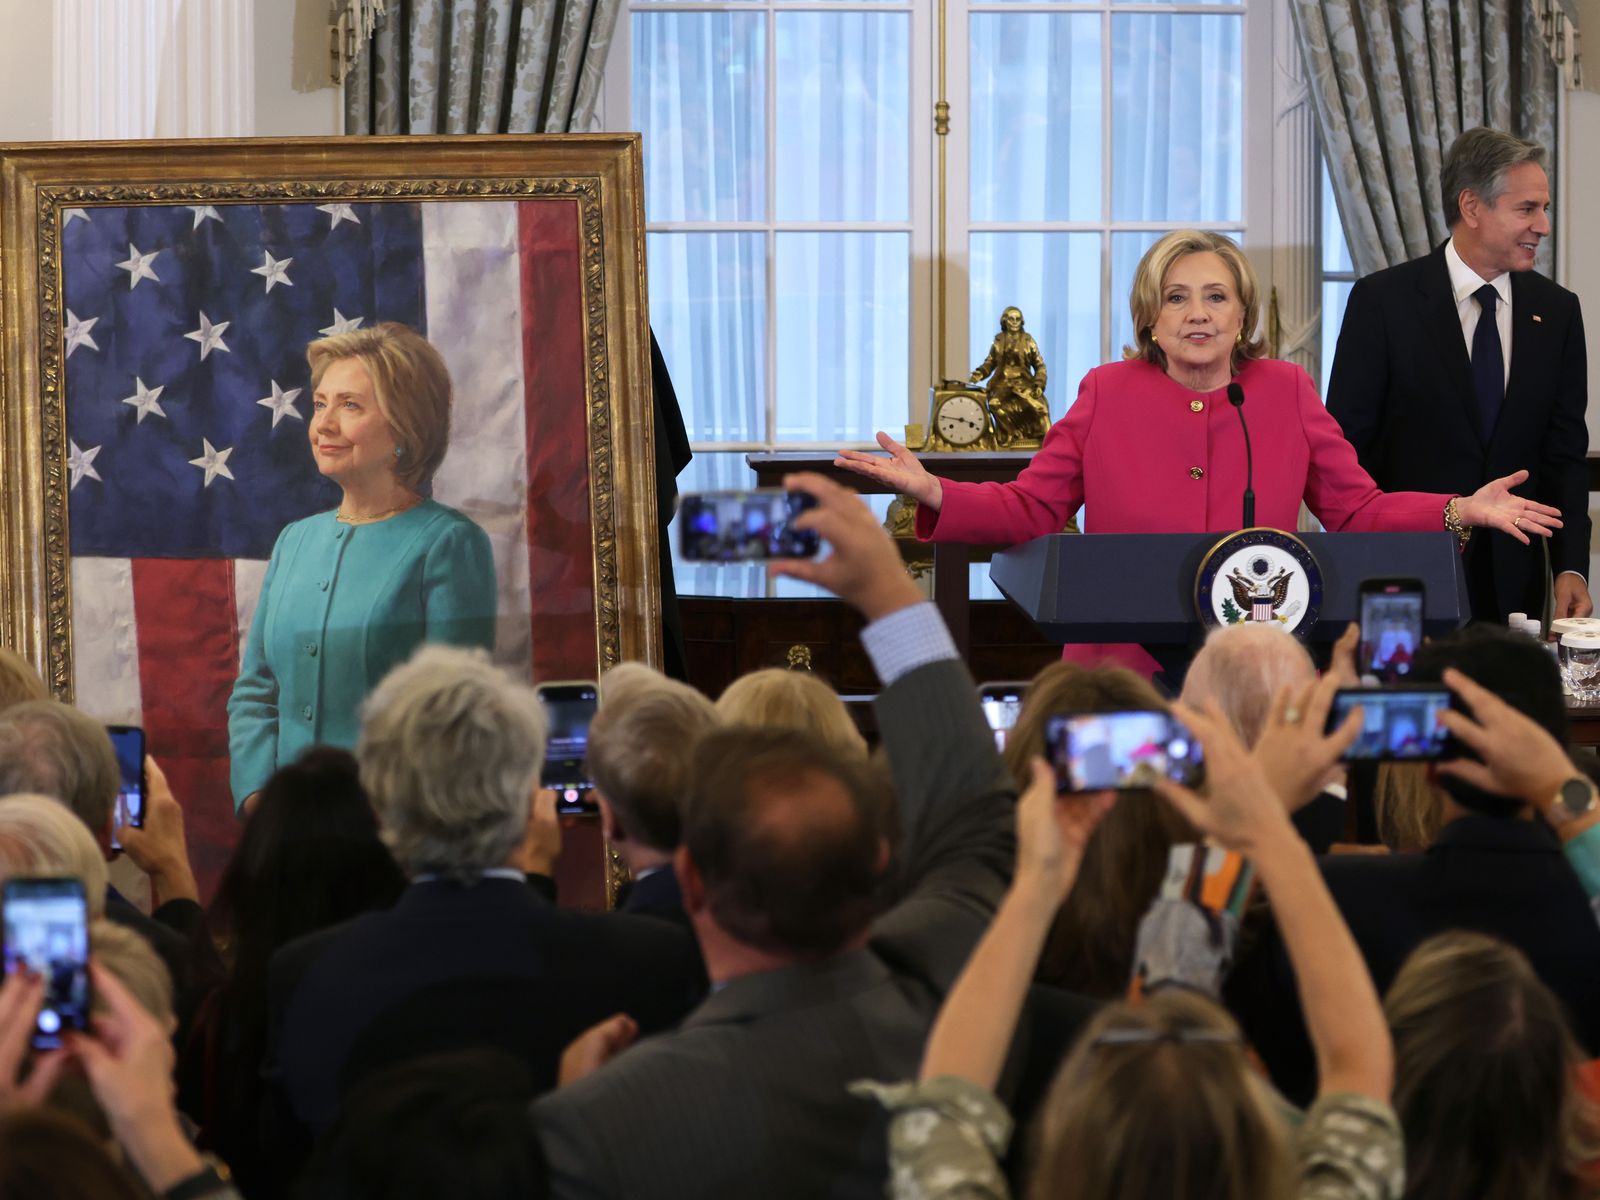 Hillary Clinton portrait unveiled at State Department